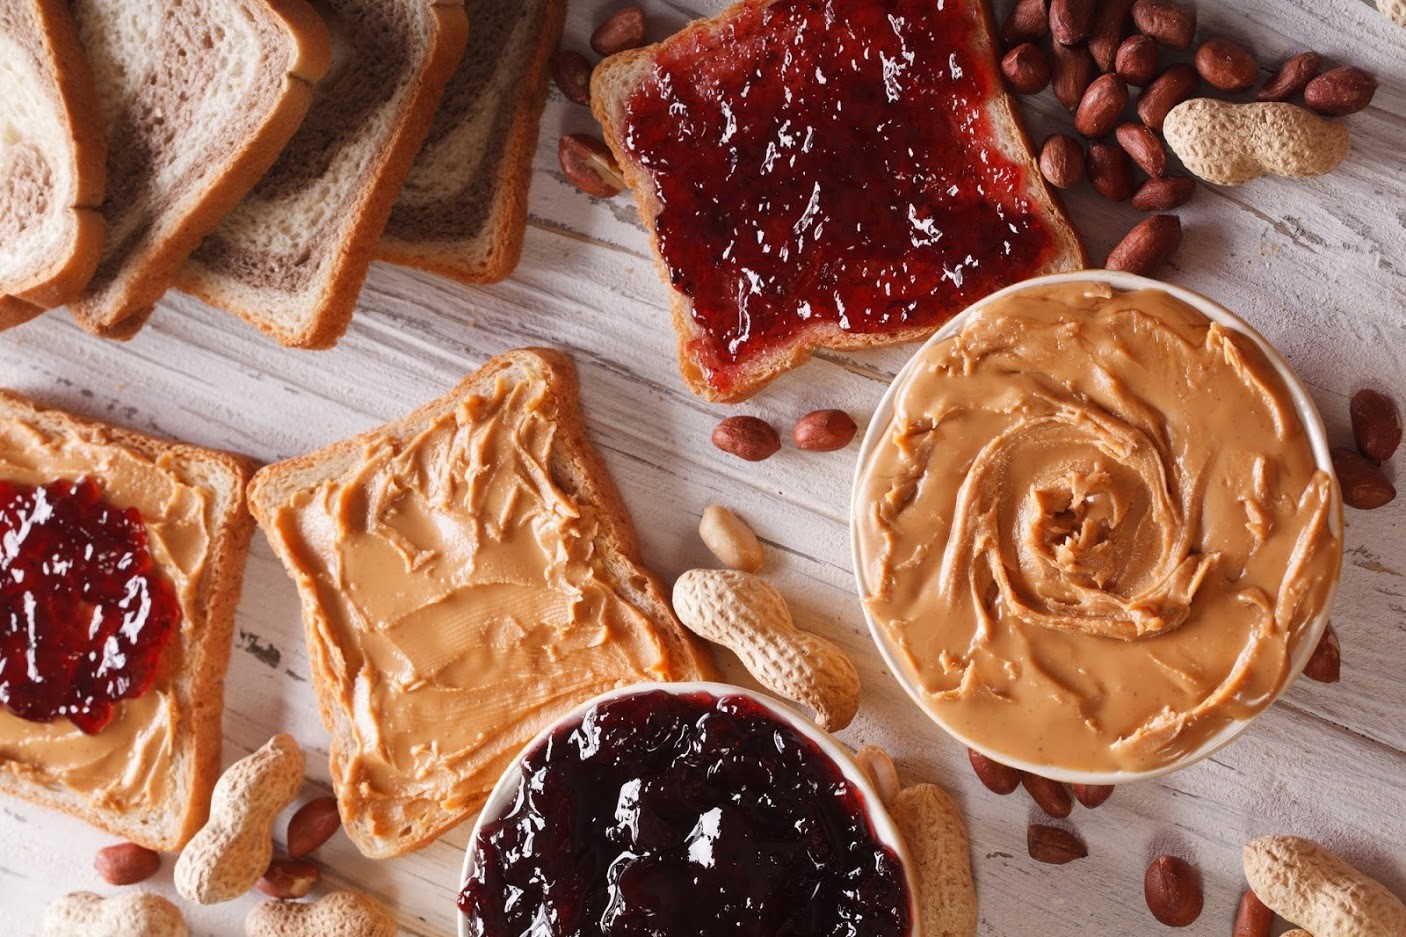 How To Buy Peanut M&M's Peanut Butter To Upgrade Your Peanut Butter & Jelly  Sandwiches